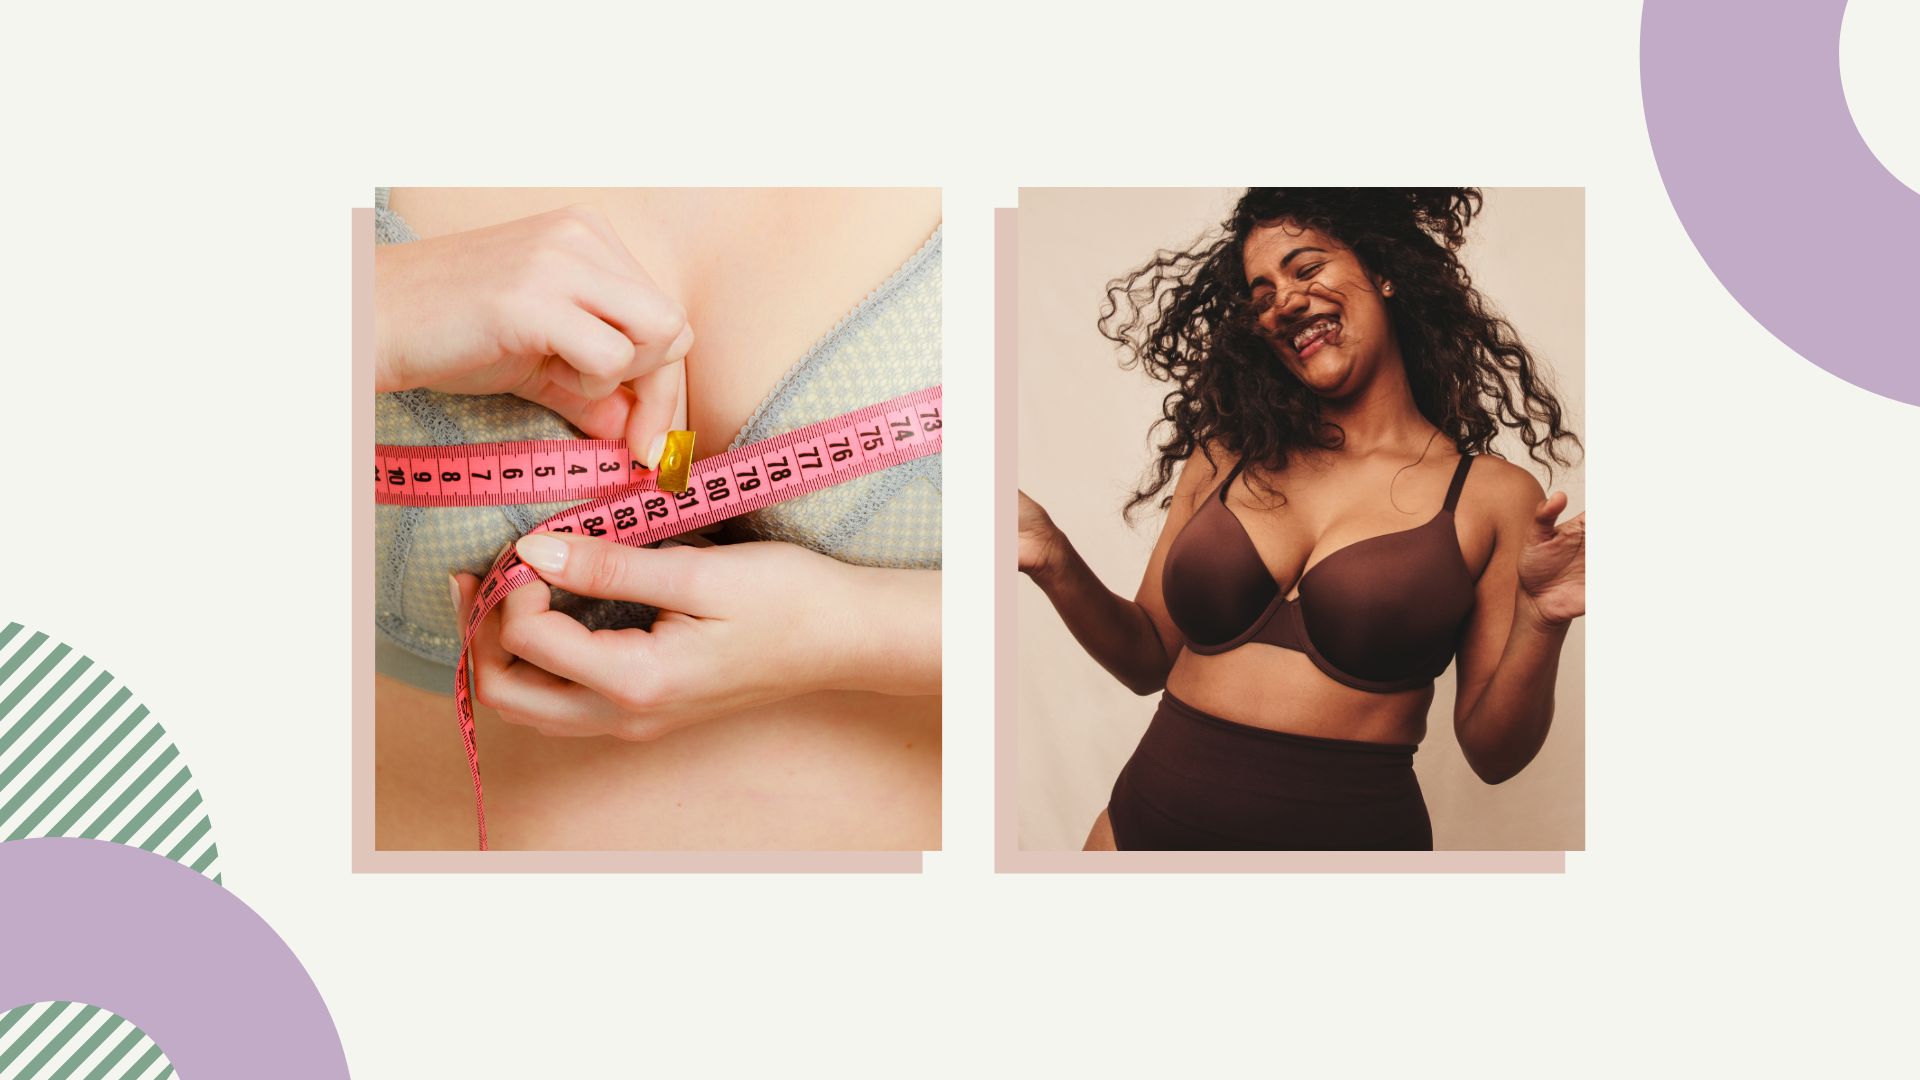 Does the measured bra size here follow for all bras; even stores